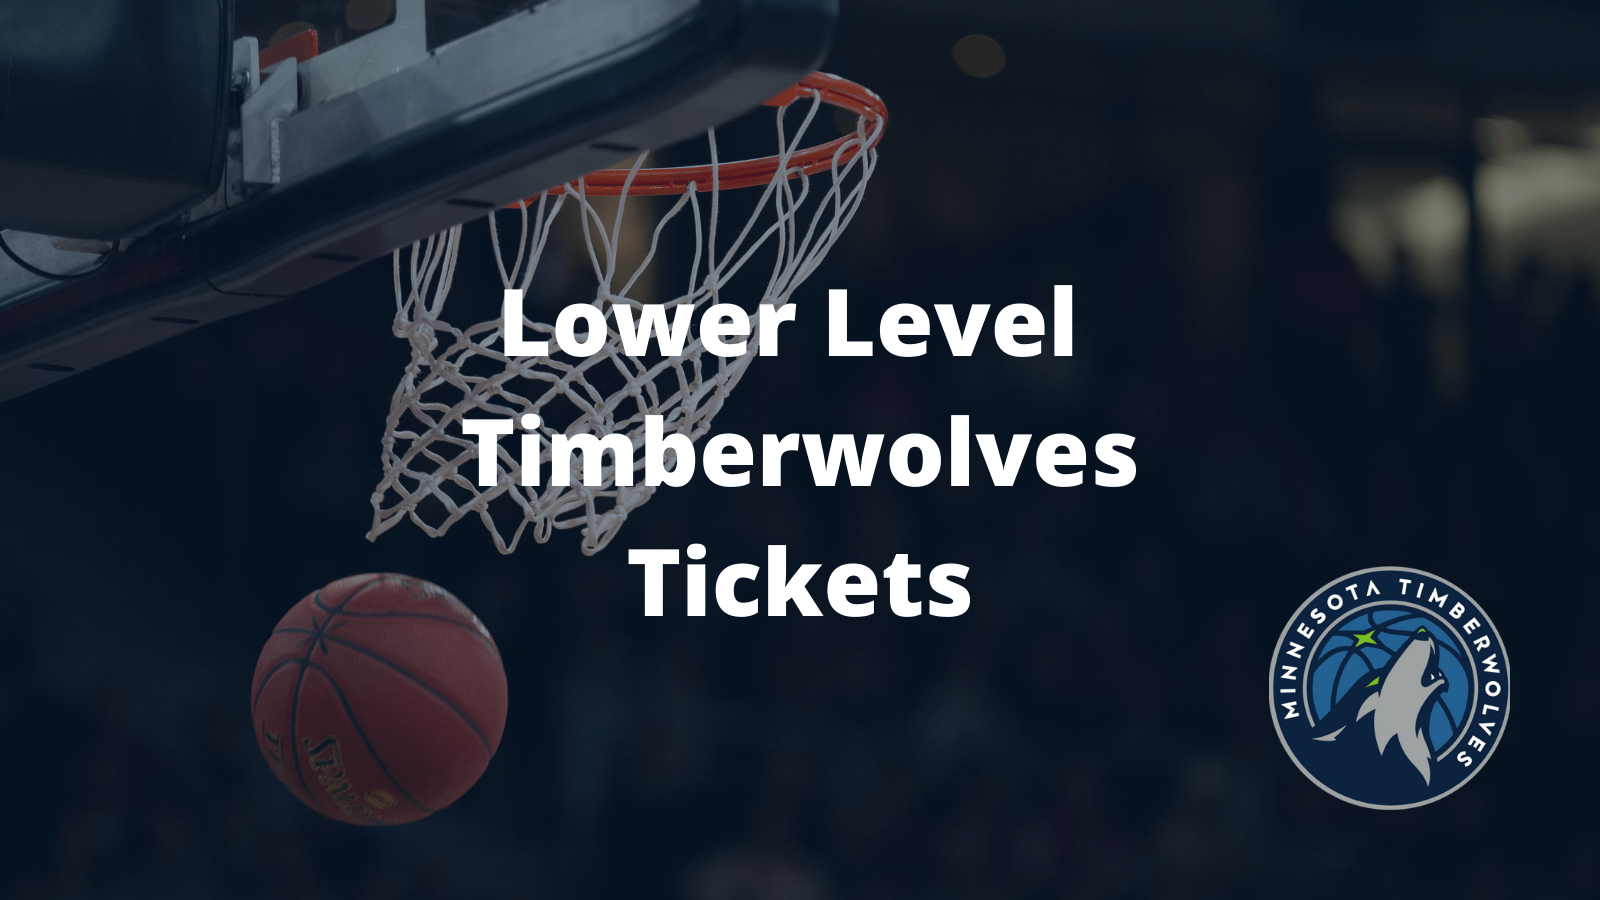 Lower Level Timberwolves Tickets